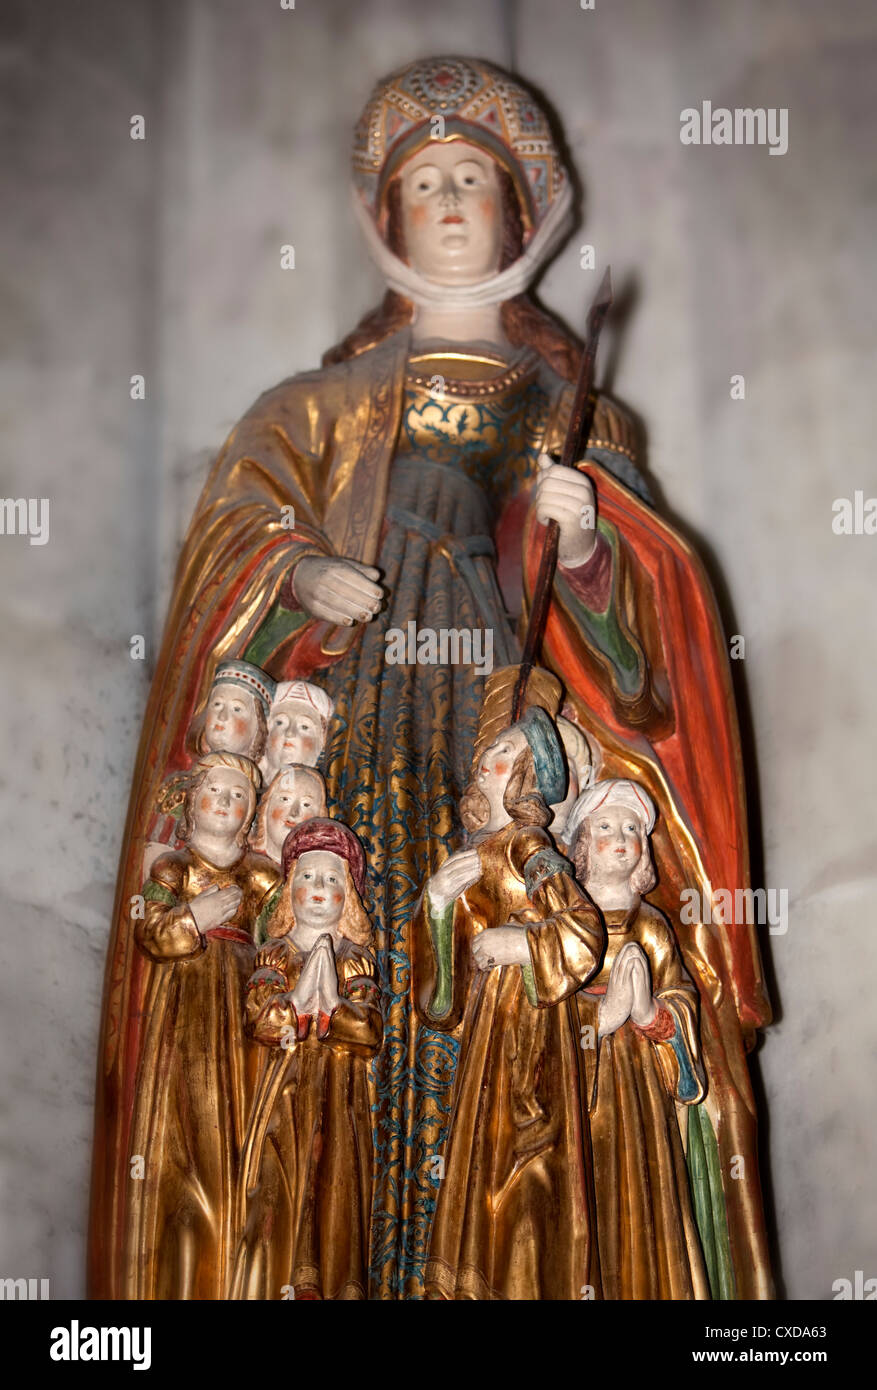 Wooden figure of the Holy Ursula, Koelner Dom, Cologne Cathedral, Germany, Europe Stock Photo